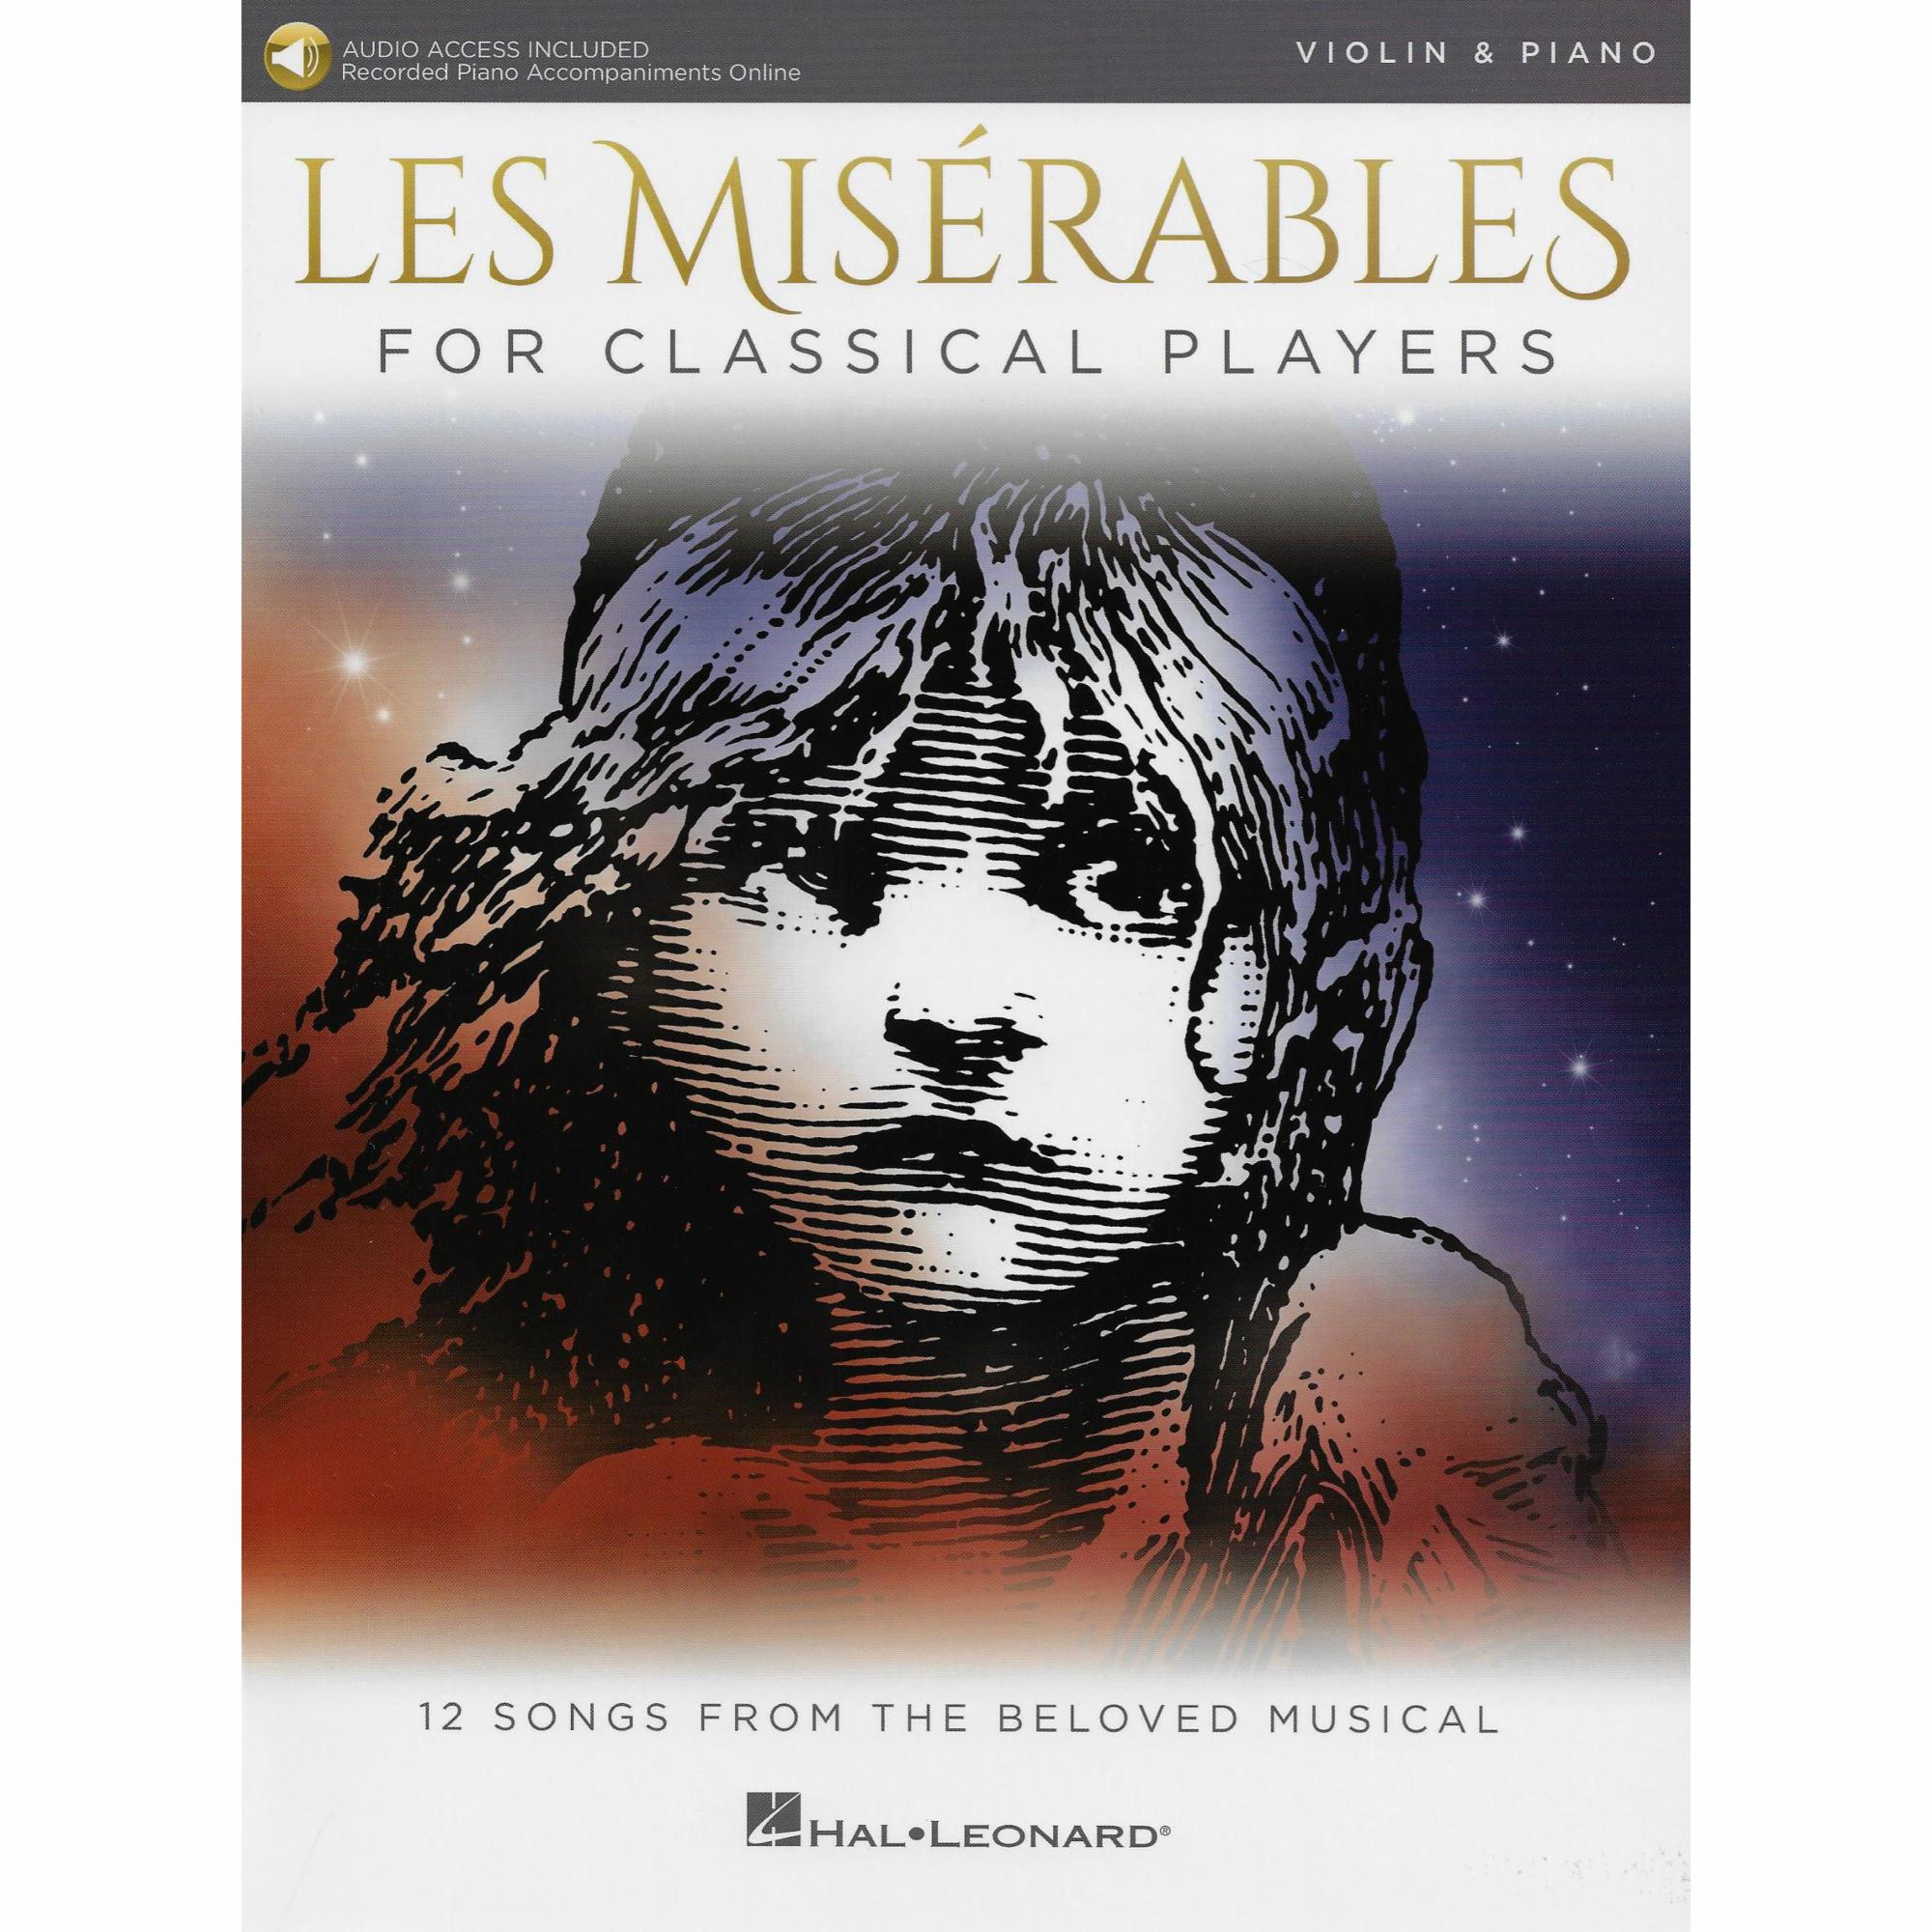 Les Miserables for Classical Players for Violin and Piano